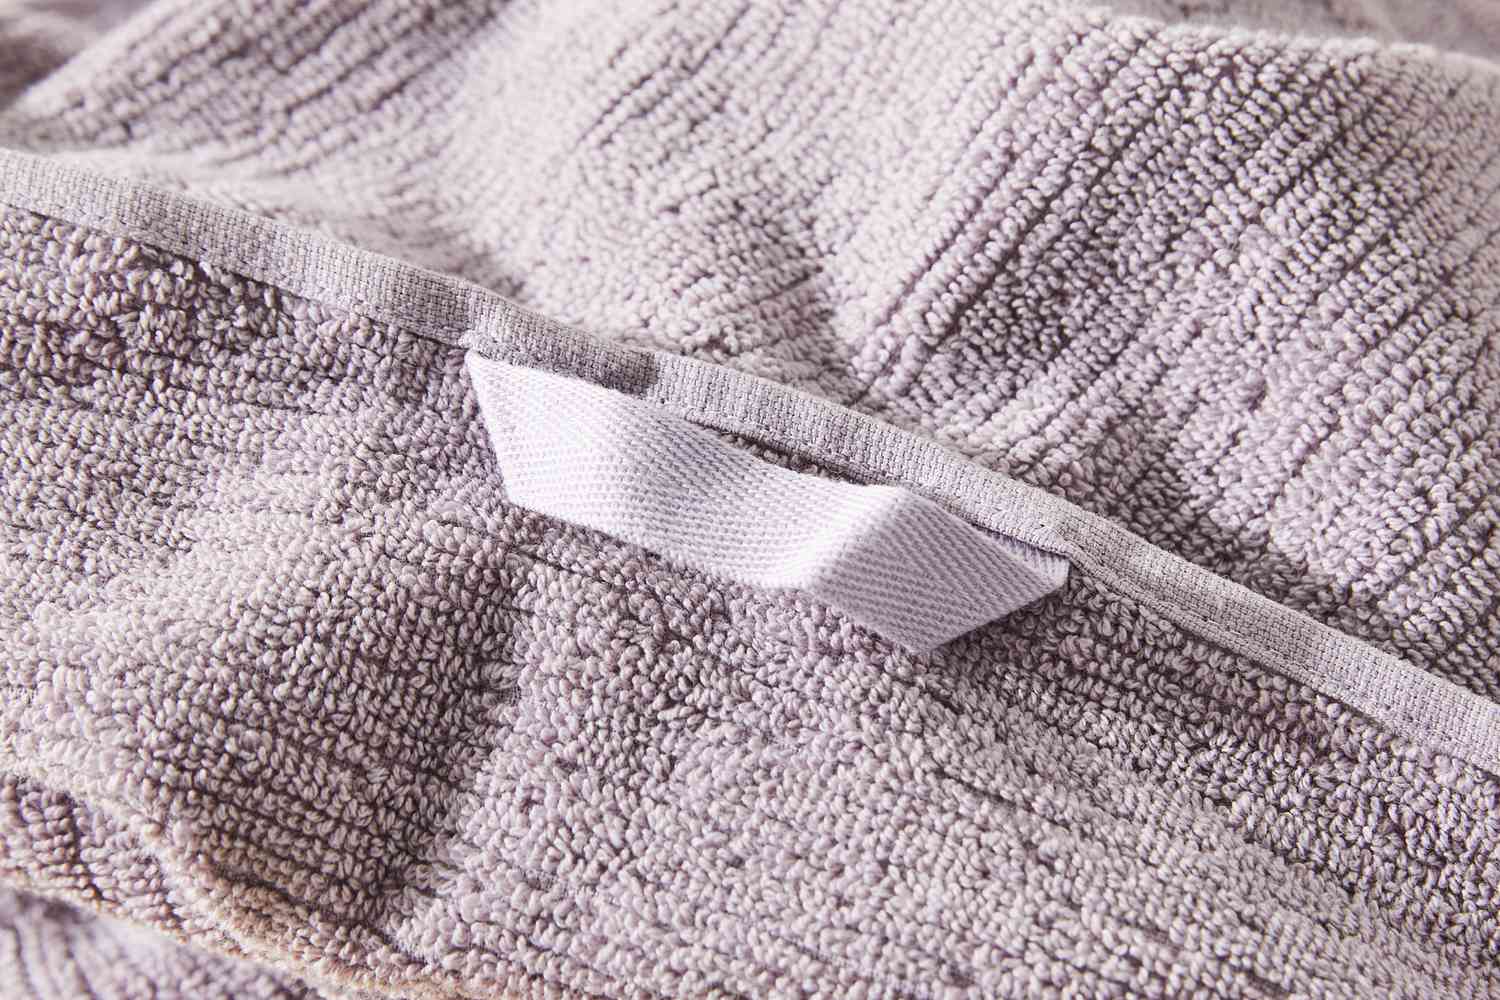 close up of handle West Elm Everyday Textured Organic Towels